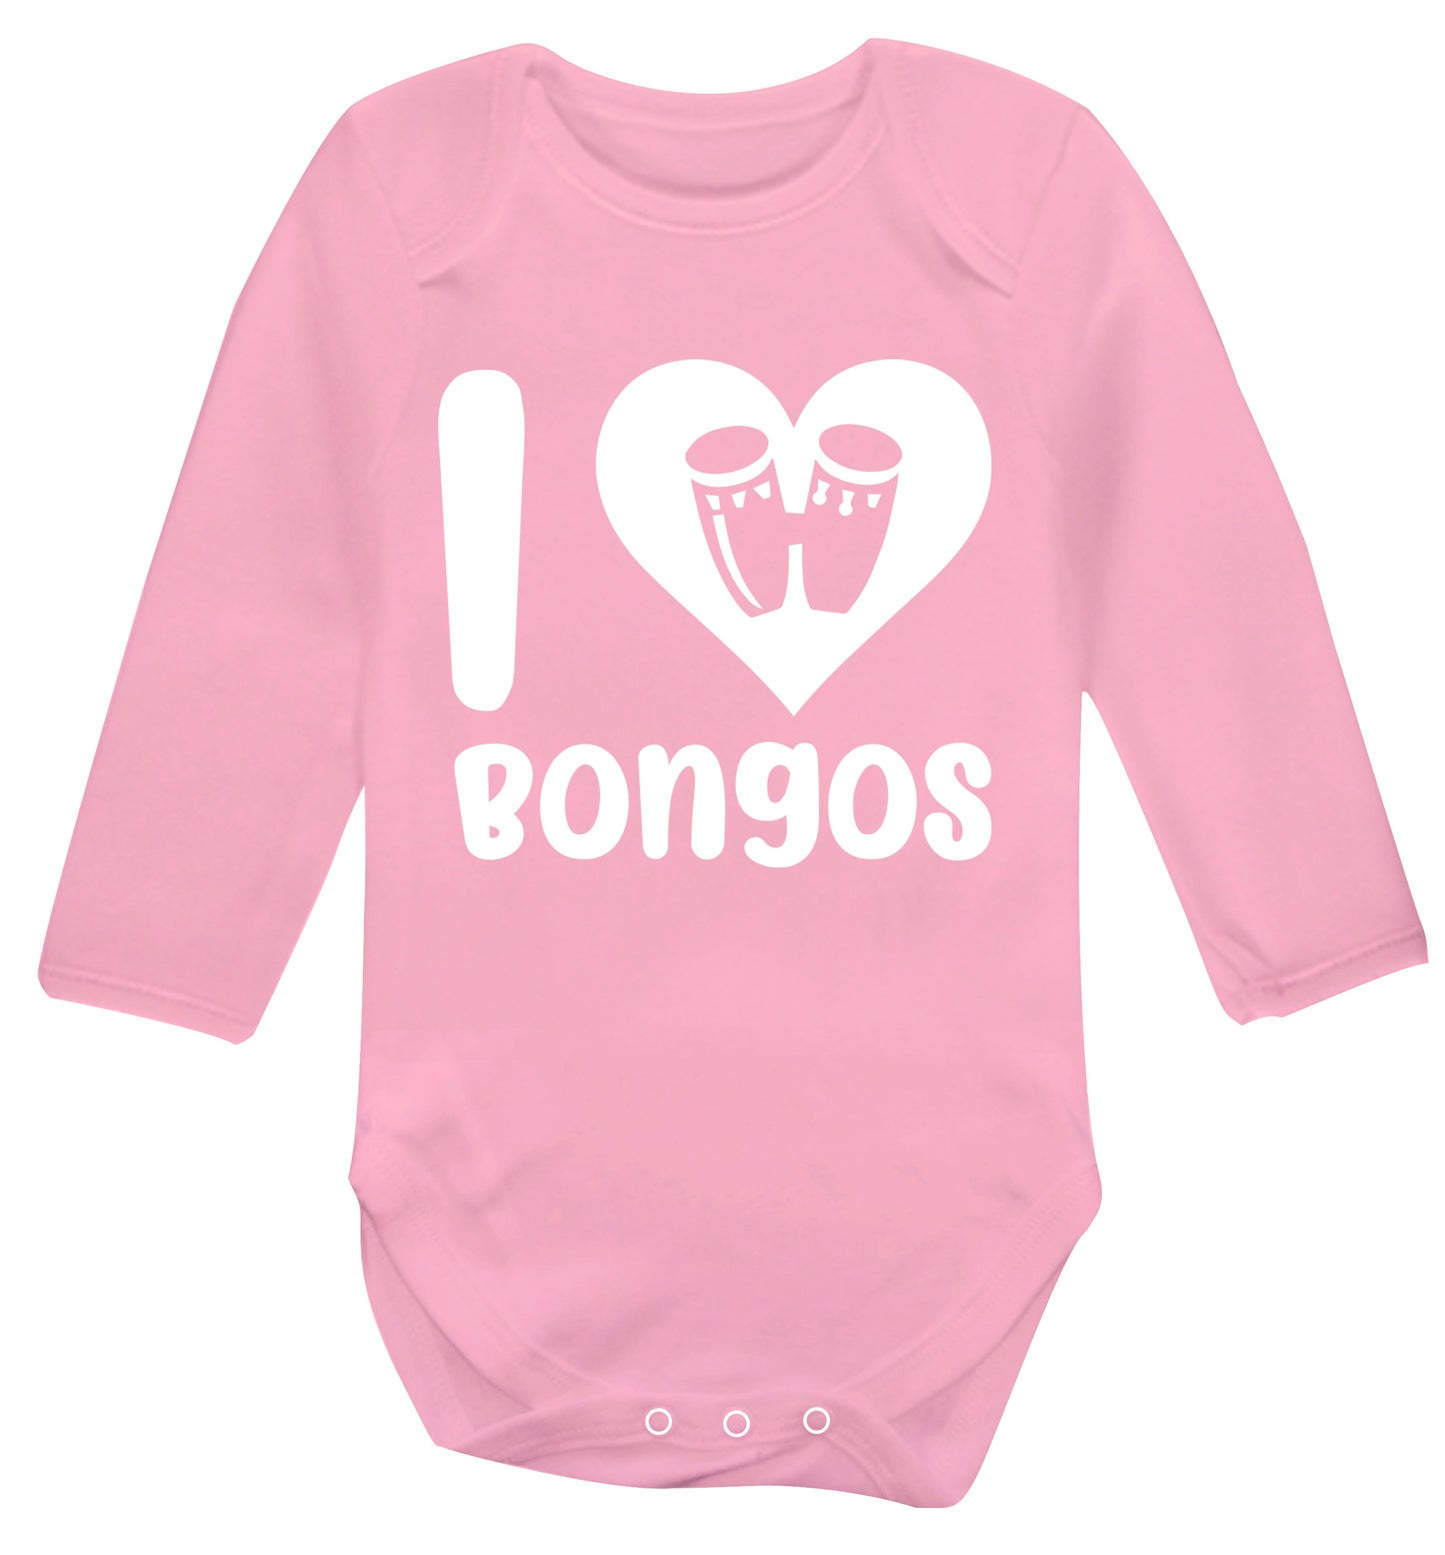 I love bongos Baby Vest long sleeved pale pink 6-12 months